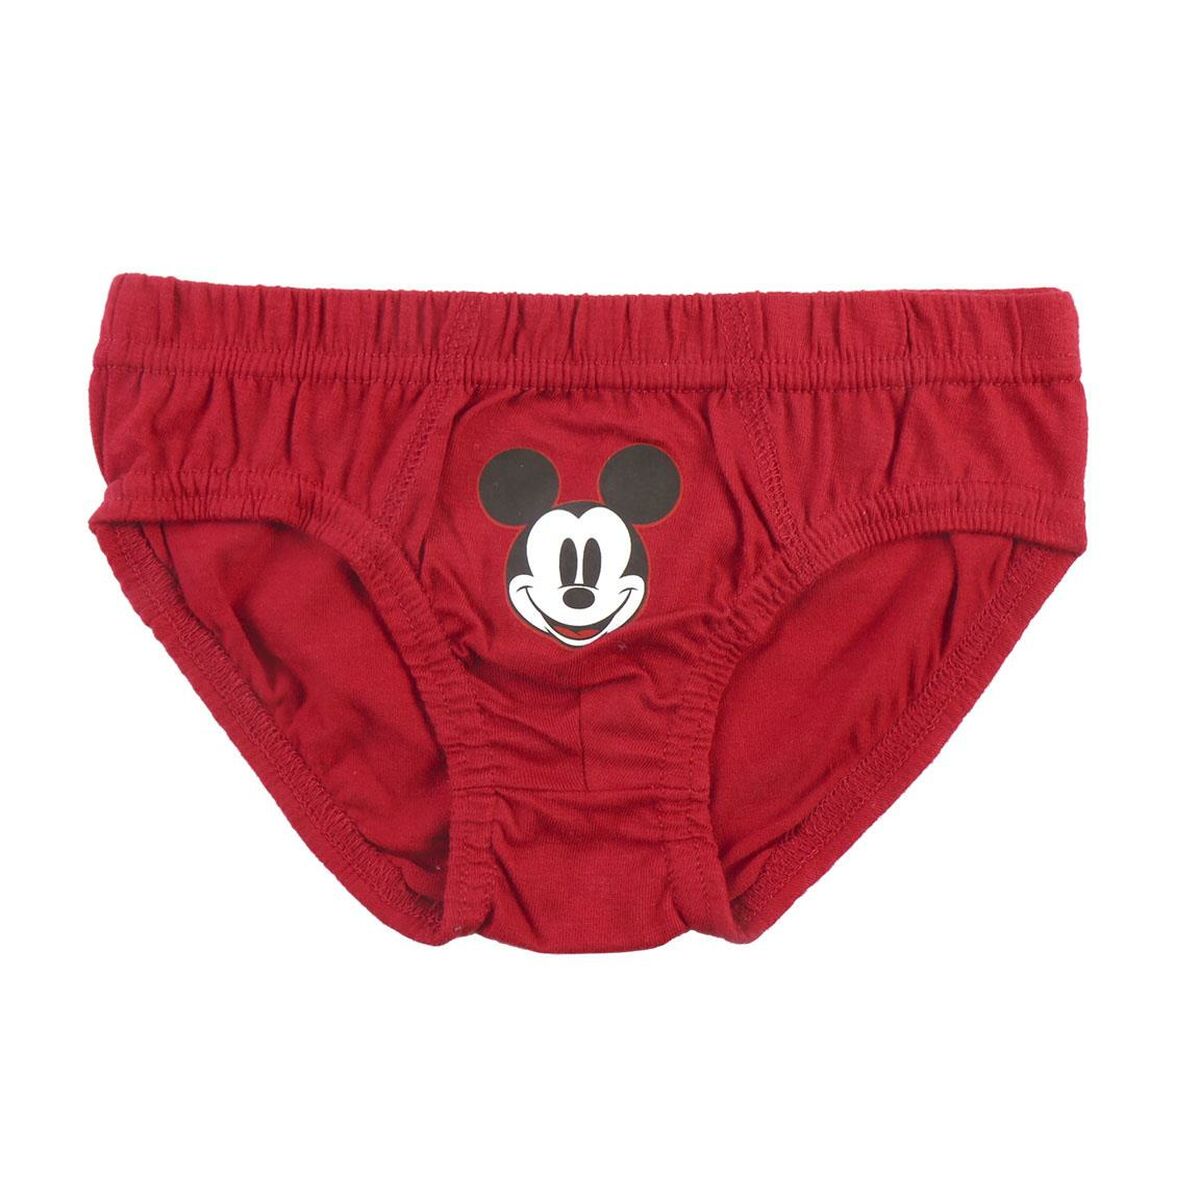 Pack of Underpants Mickey Mouse 3 Units Multicolour